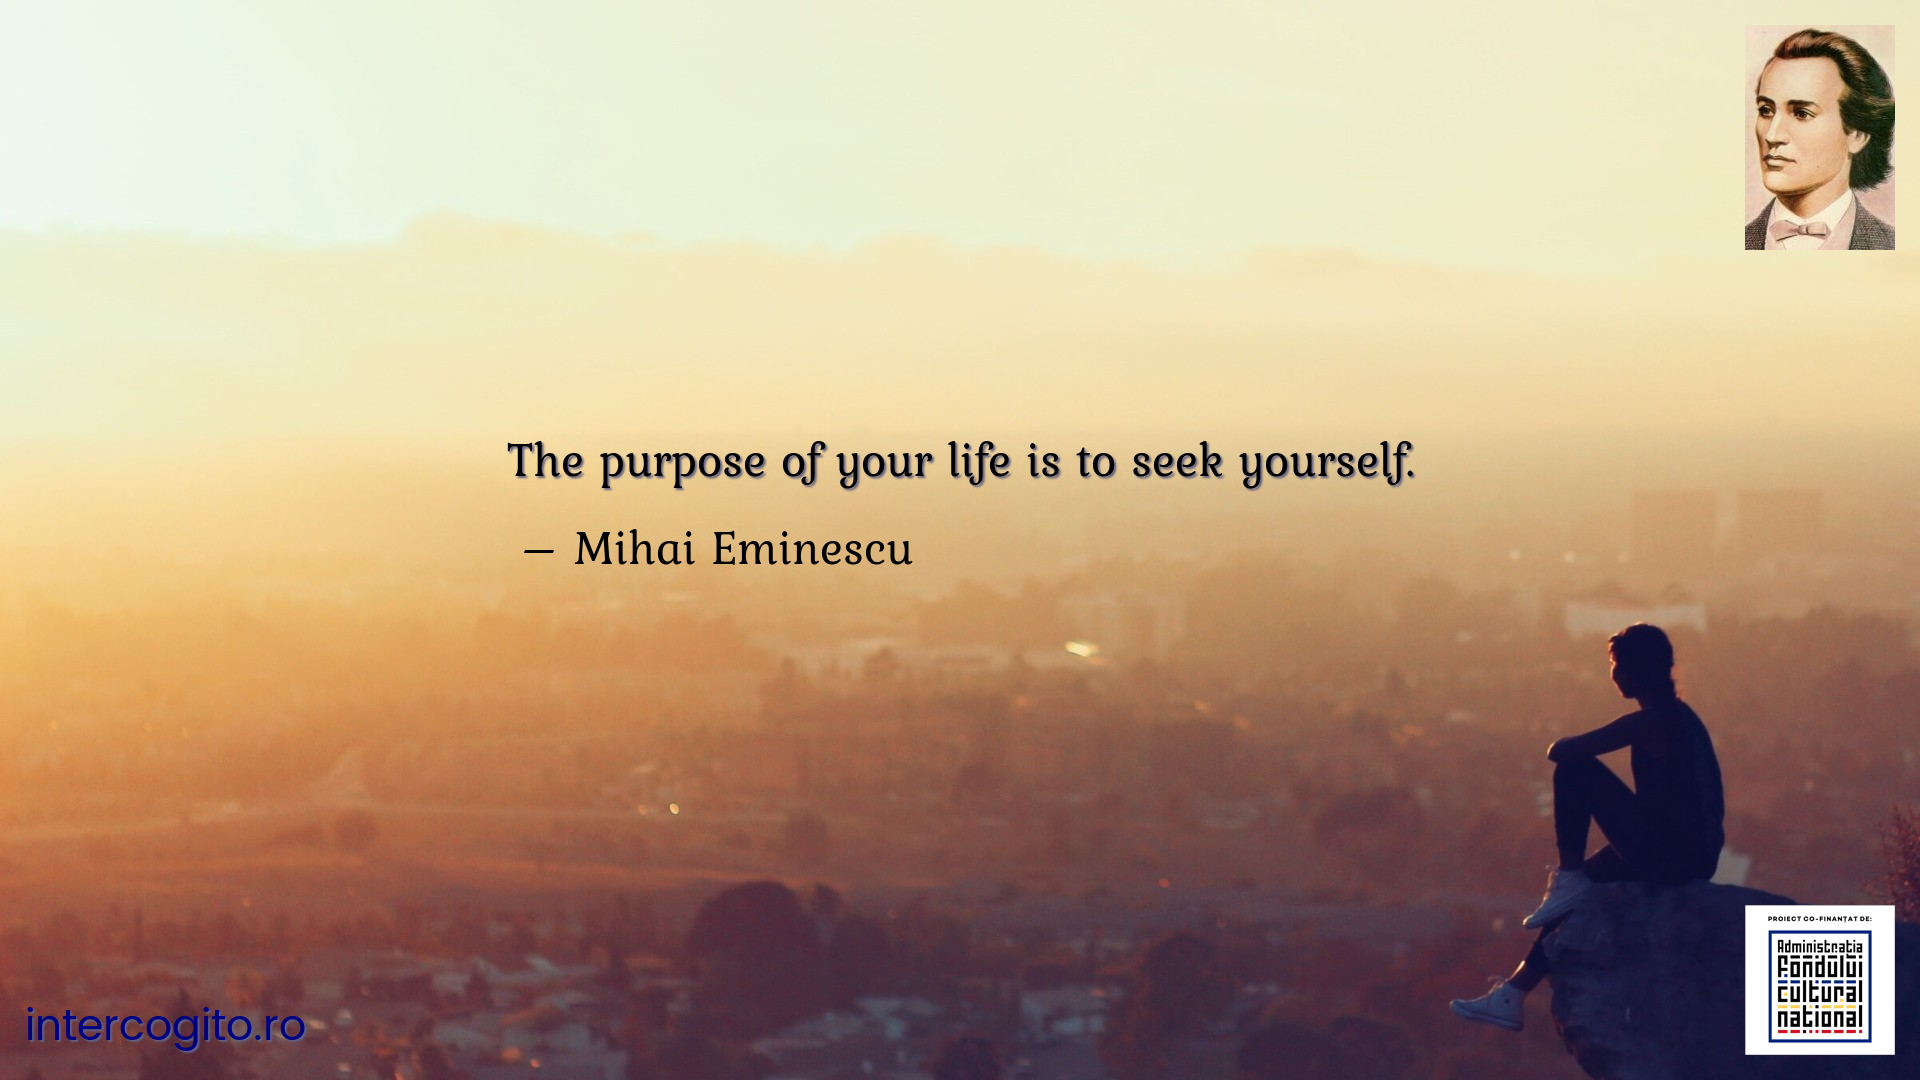 The purpose of your life is to seek yourself.